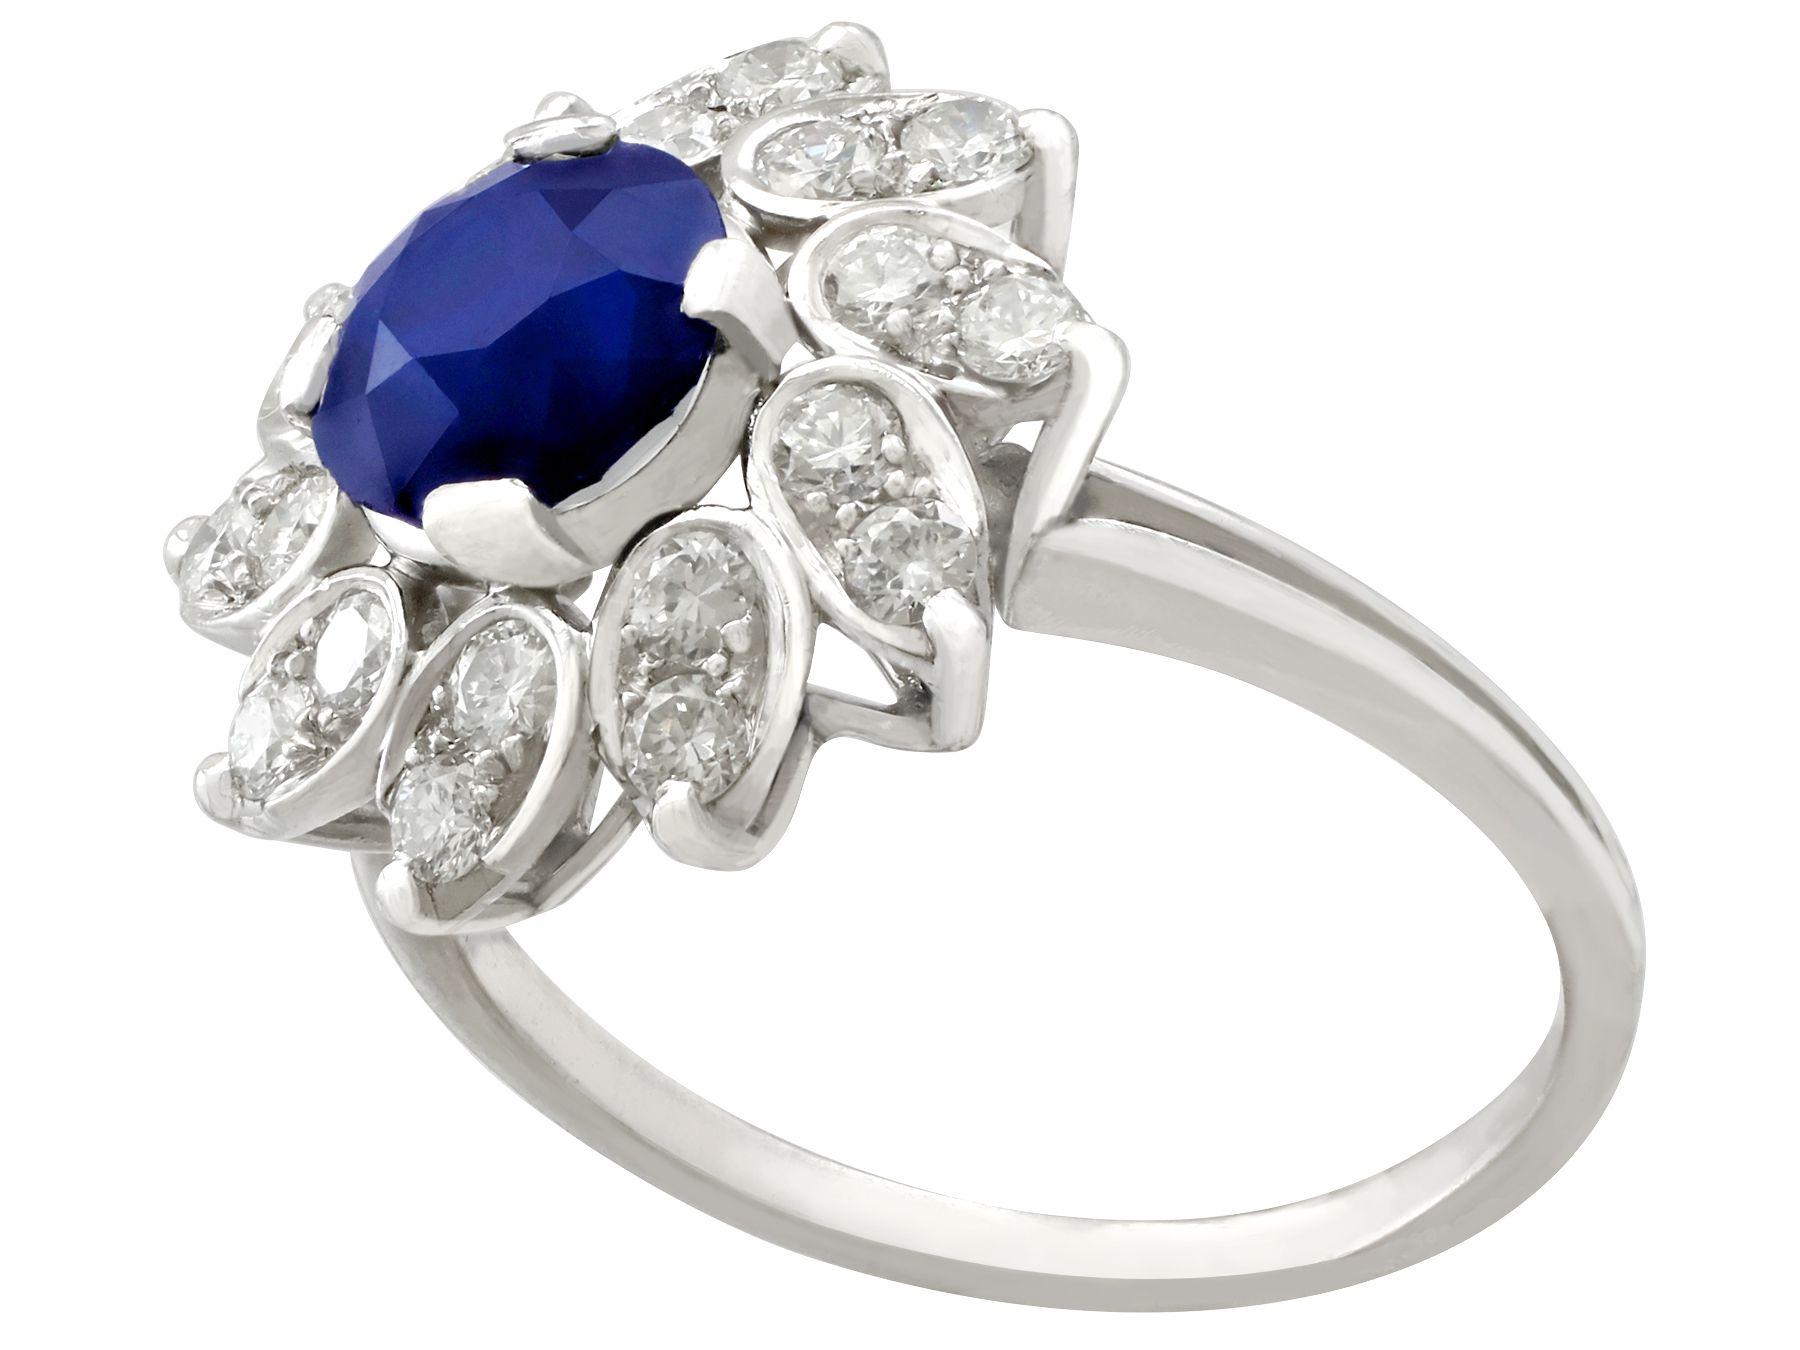 1.94 Carat Sapphire and Diamond Platinum Cocktail Ring In Excellent Condition For Sale In Jesmond, Newcastle Upon Tyne